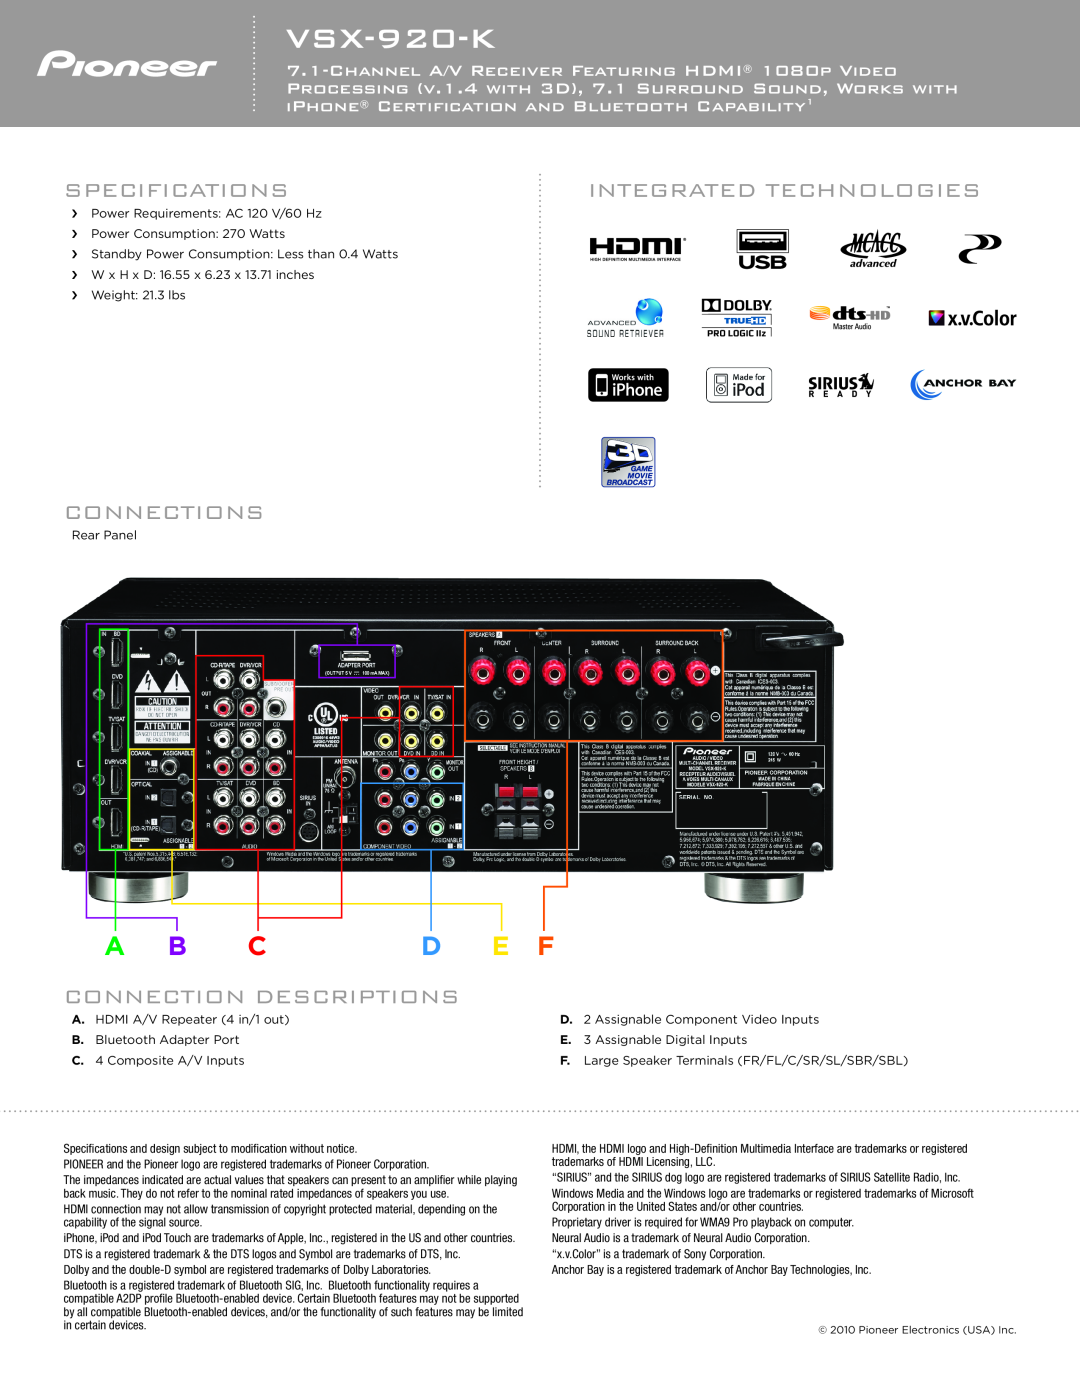 Pioneer VSX-920-K manual Specifications, Integrated Technologies, Connections, Connection Descriptions, A B C D E F 